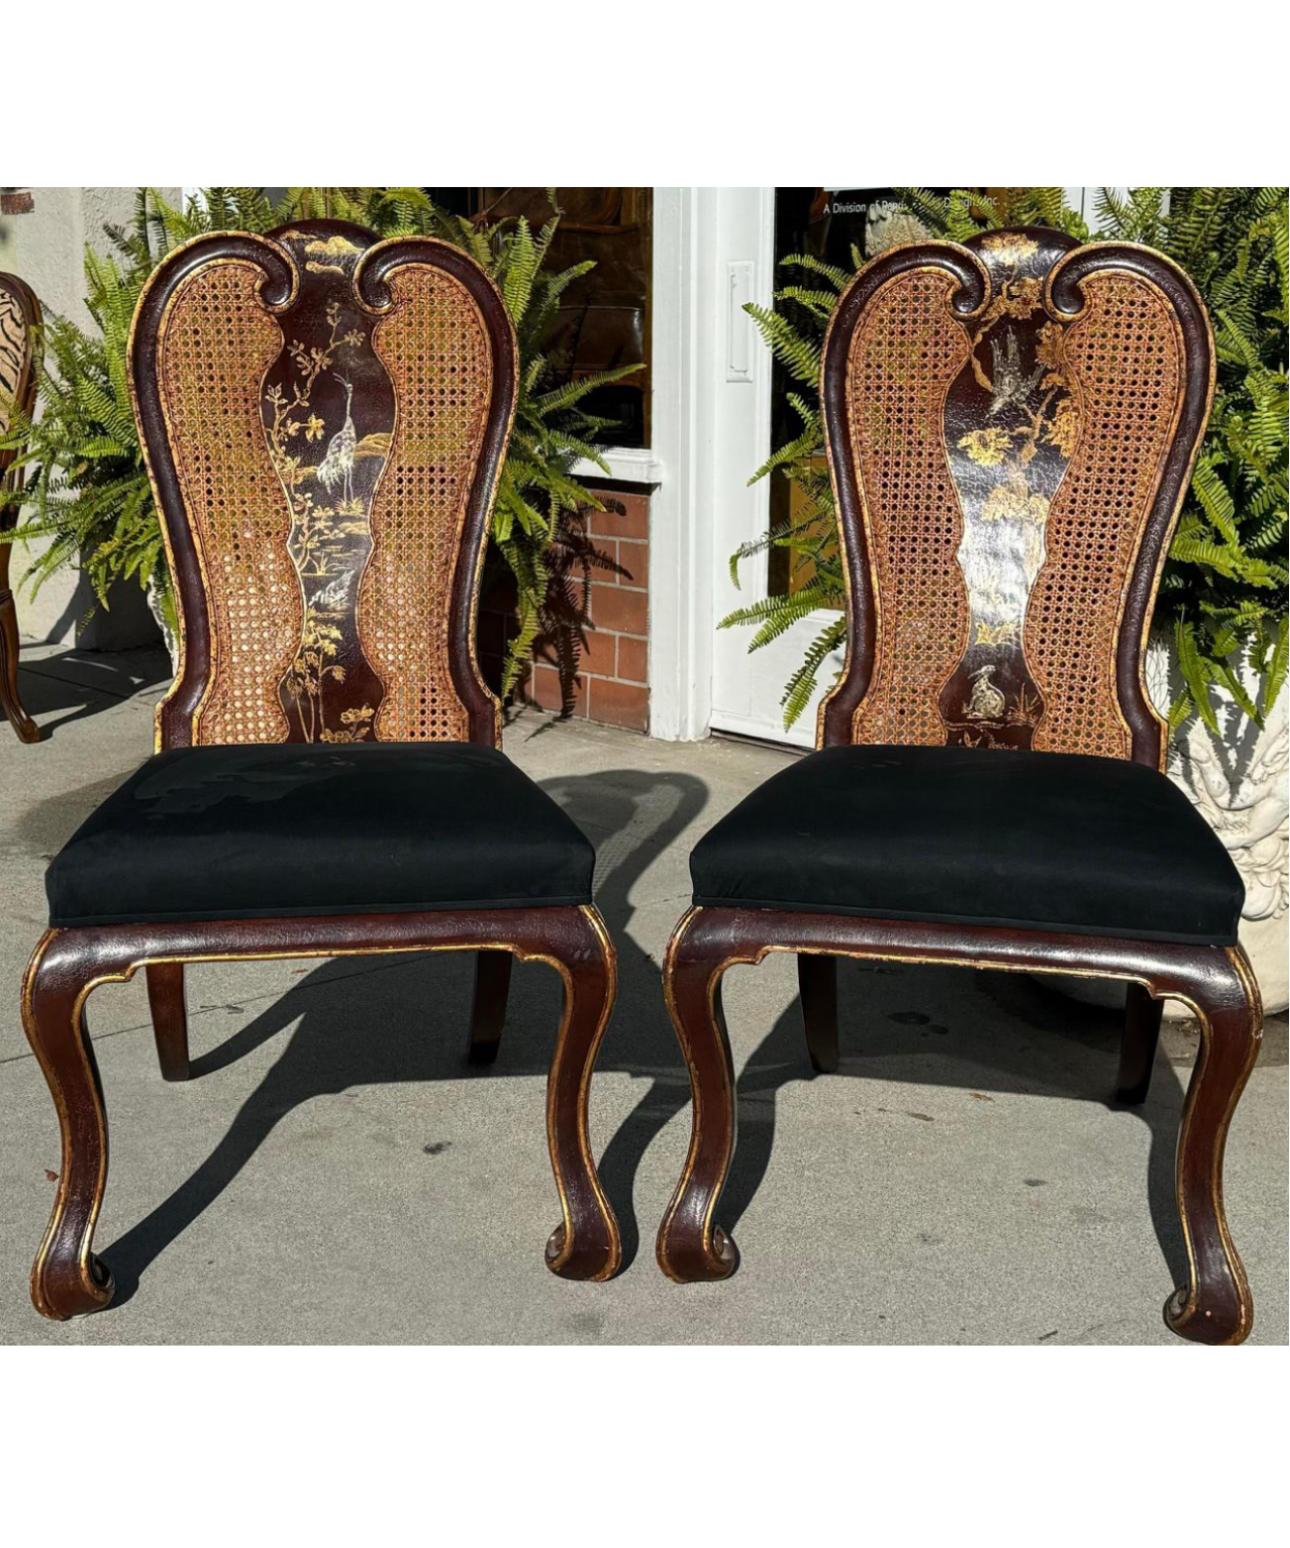 Pair of Rose Tarlow Melrose House Chinoiserie Chairs. This listing is for one pair but we have two pair available. 